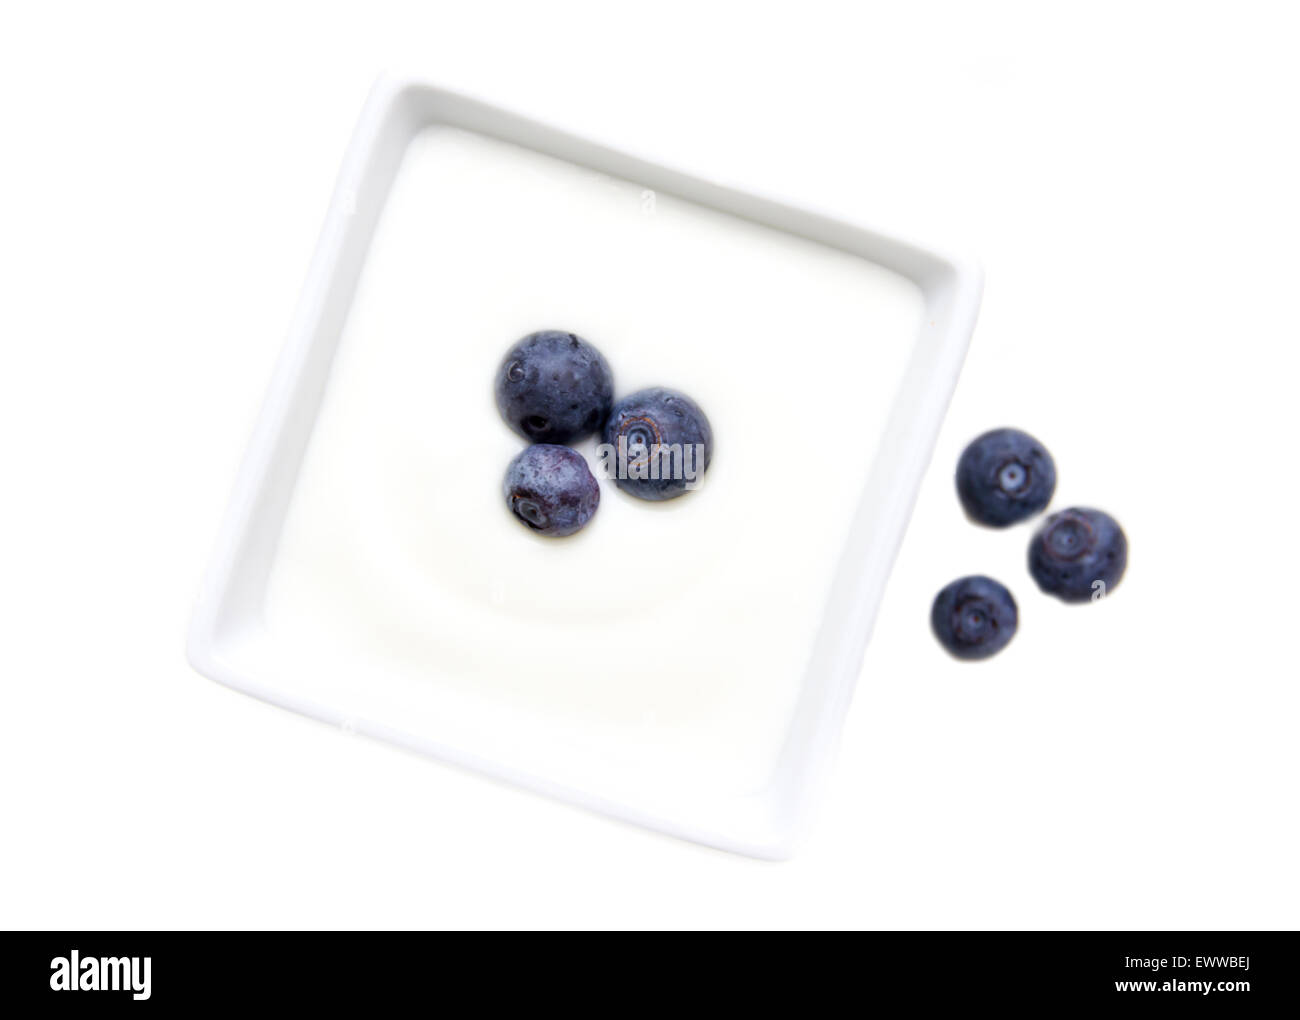 Yogurt with blueberries on square bowl on a white background seen from above Stock Photo